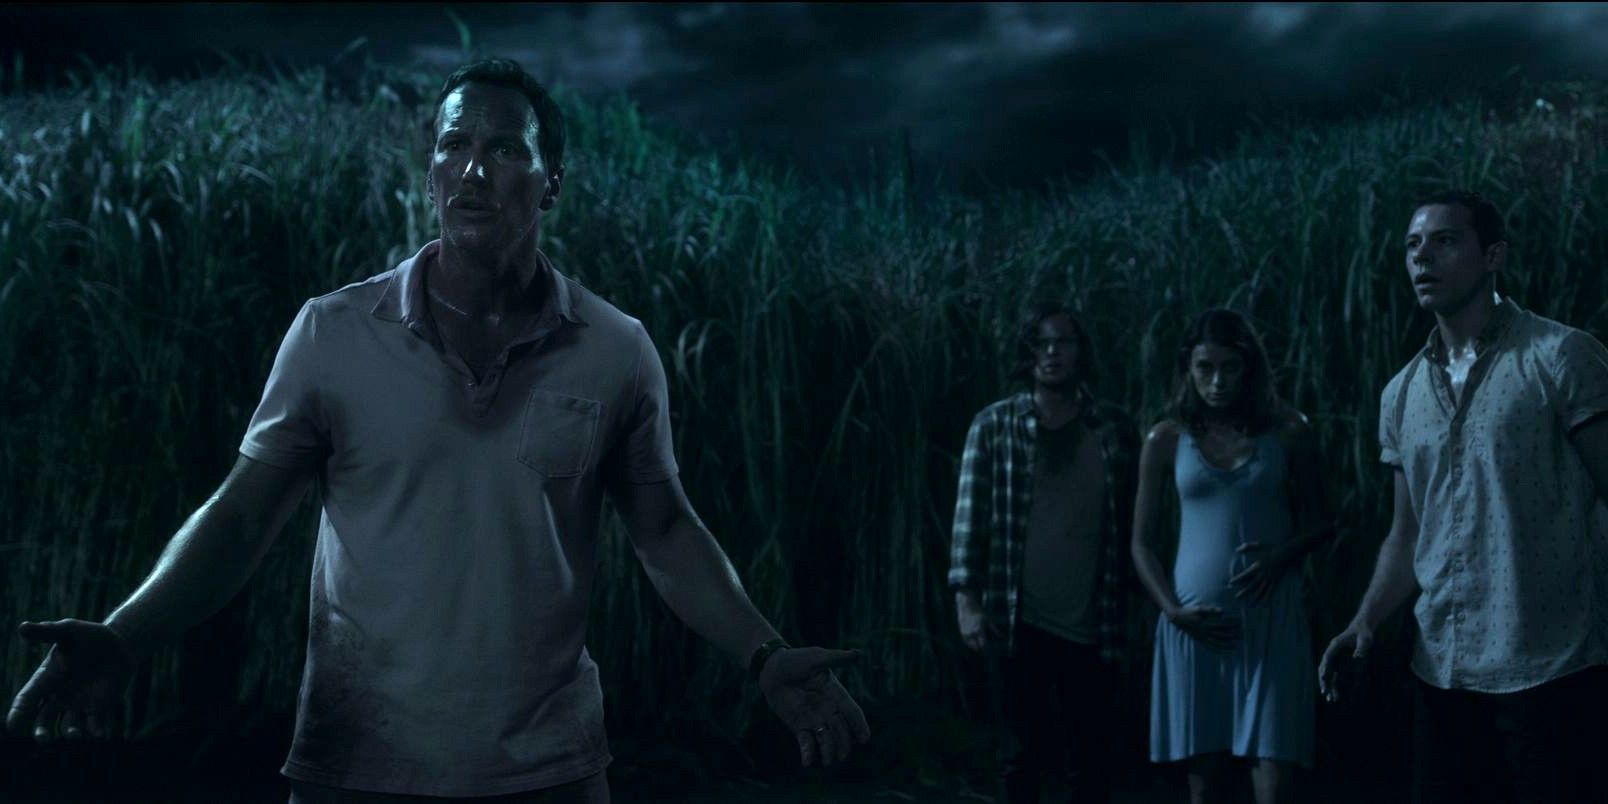 Patrick Wilson Avery Whitted Harrison Gilbertson and Laysla De Oliveira in In the Tall Grass